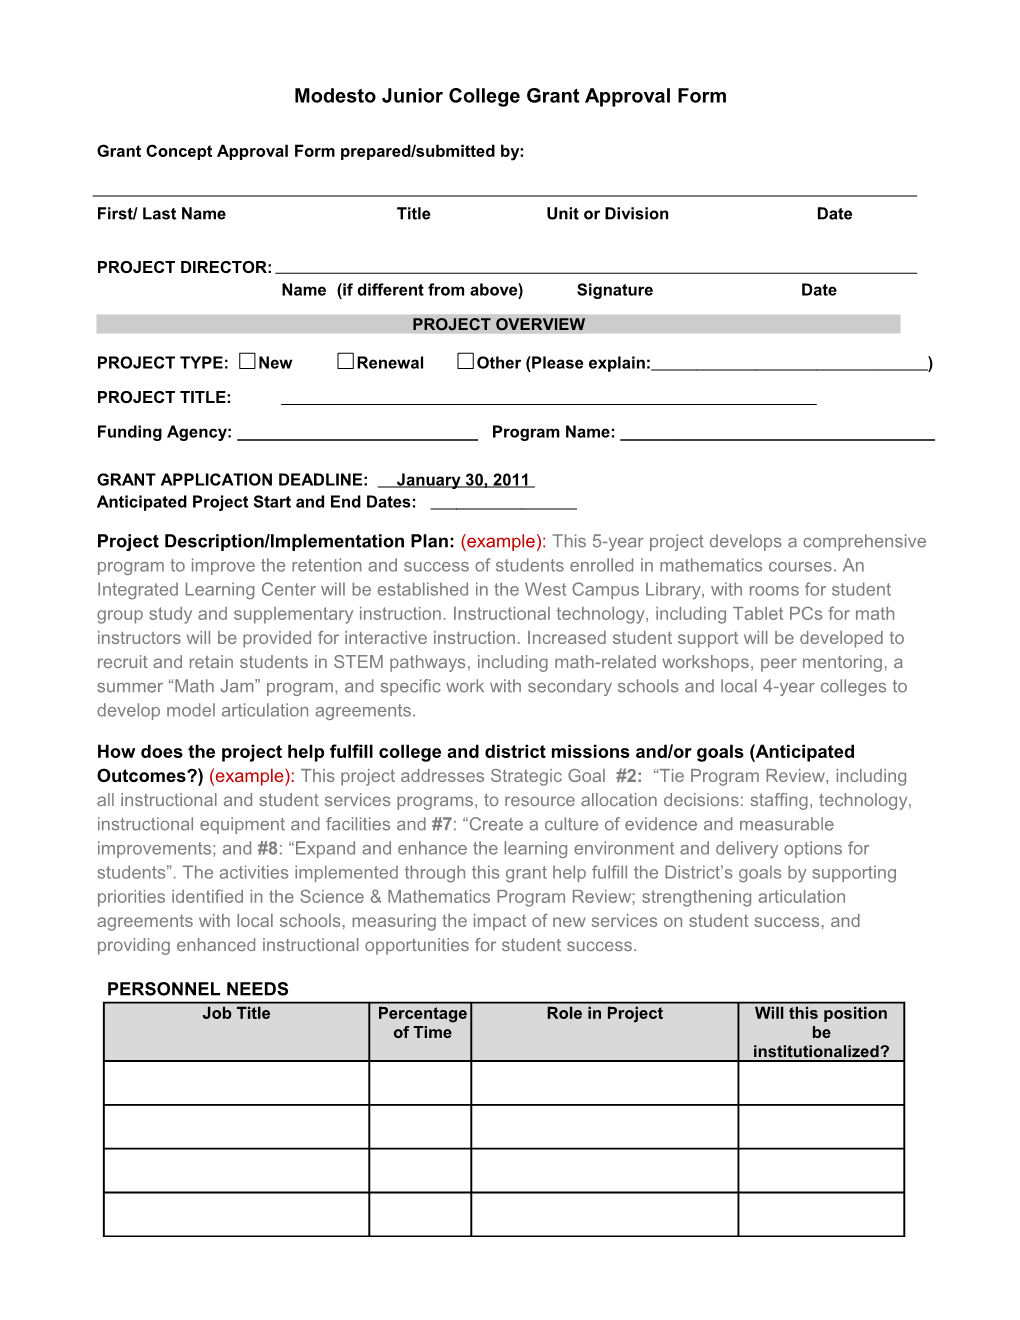 Approval Form for Grant Application (S)